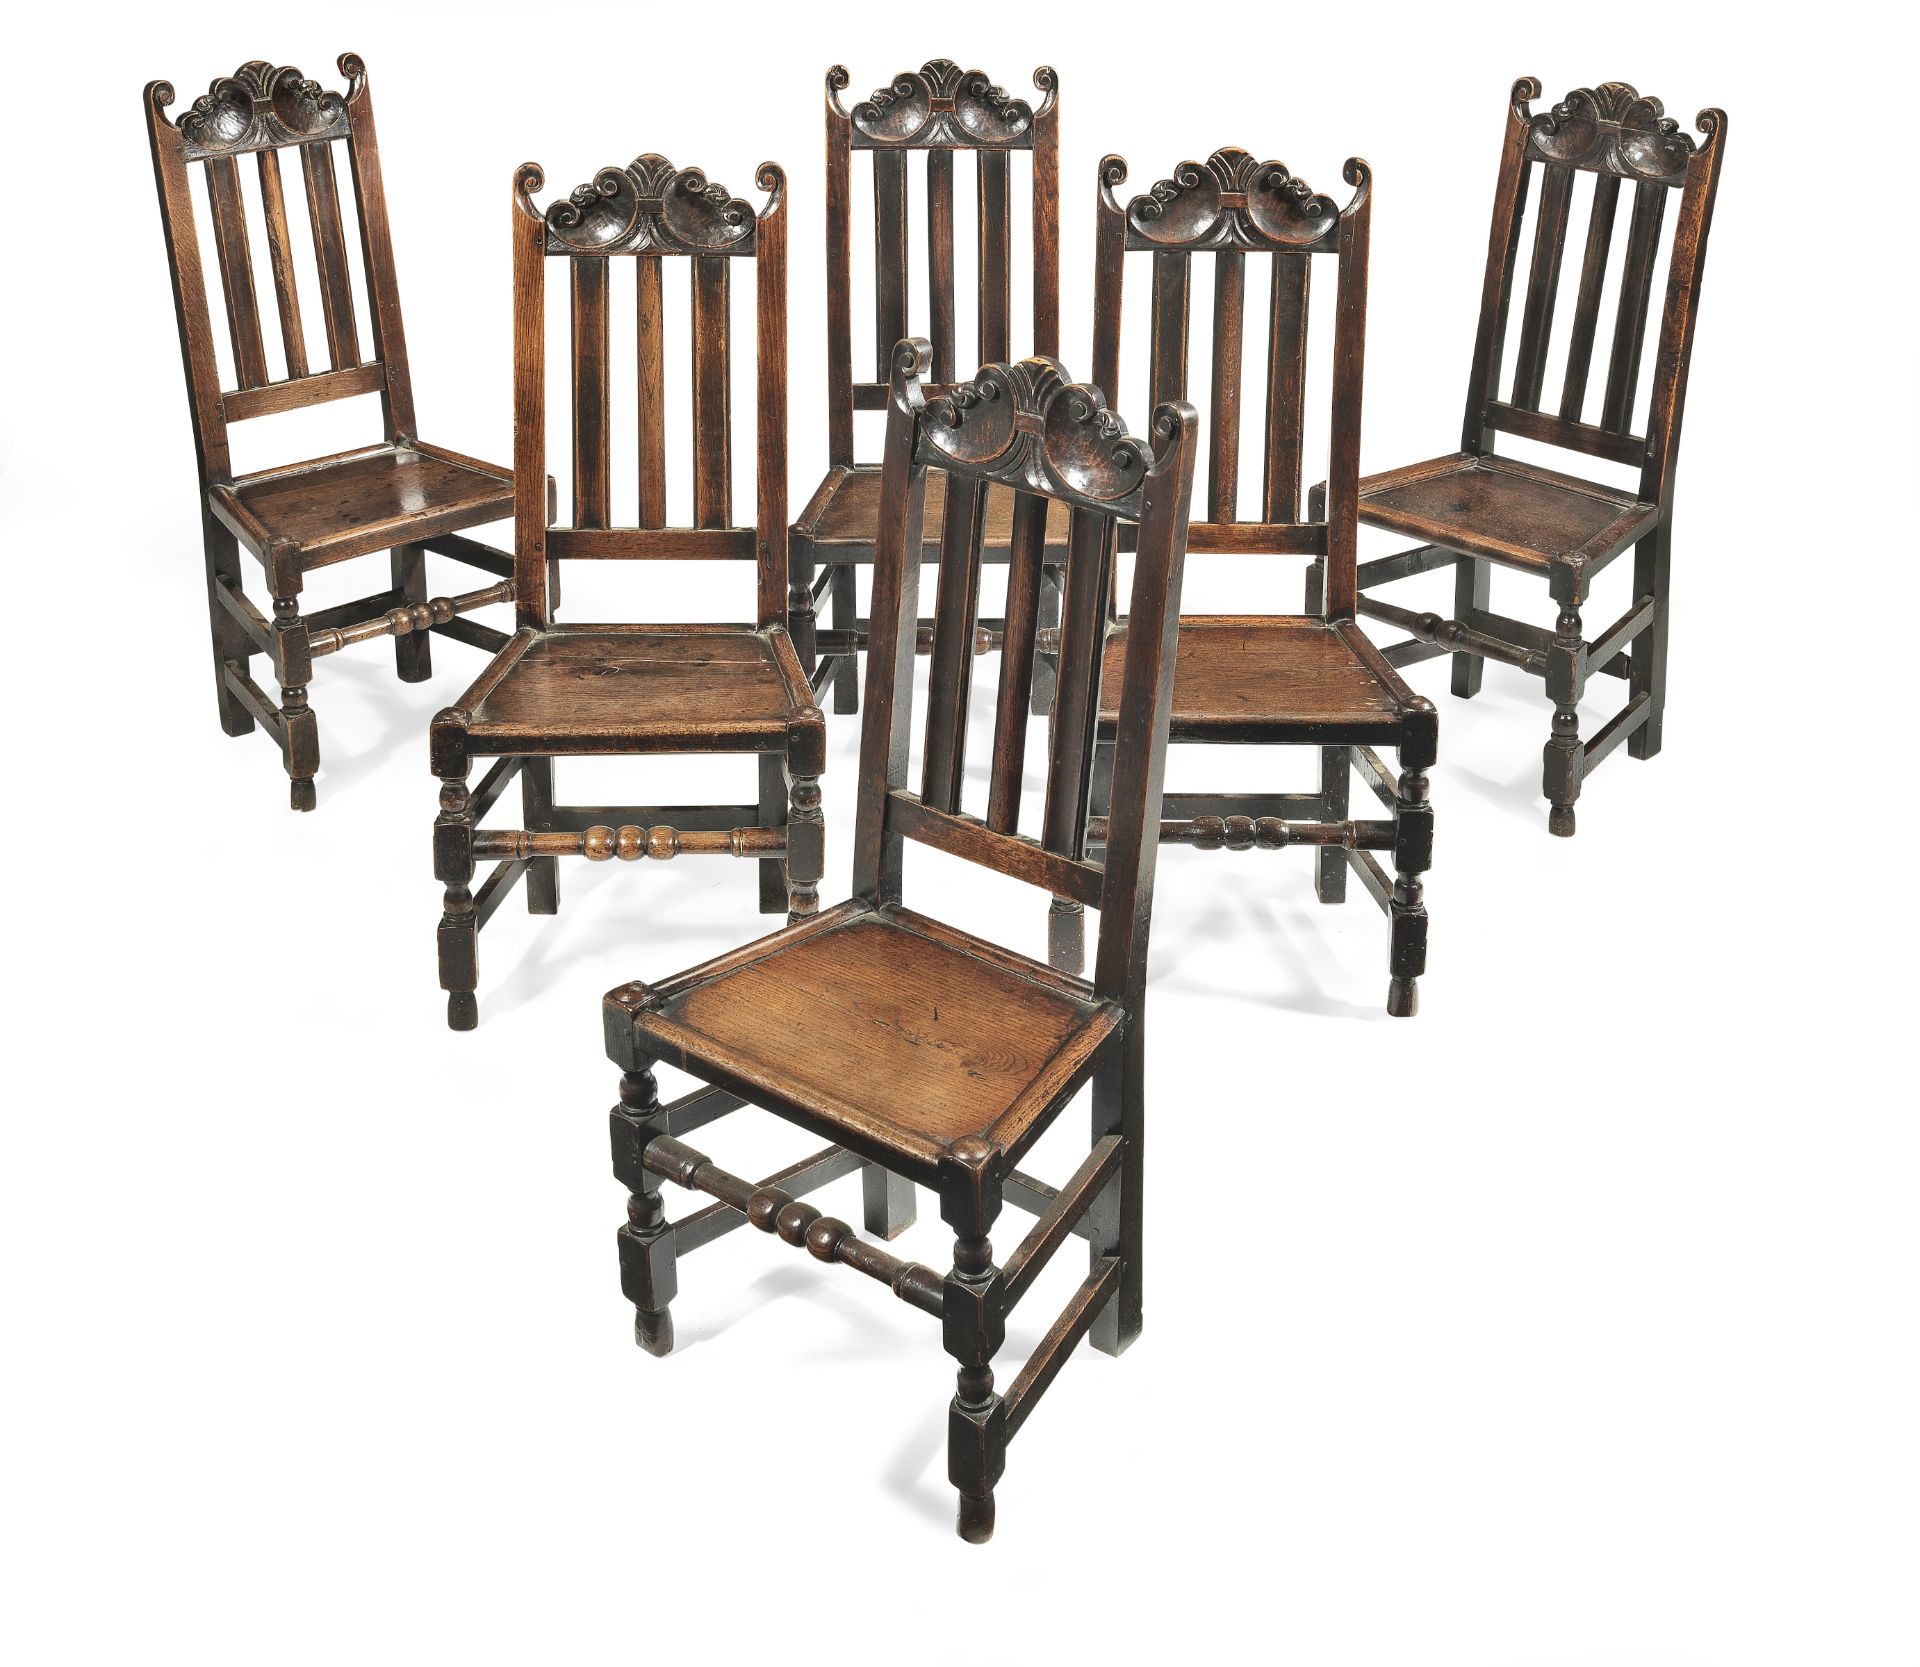 A very near-set of six late 17th century joined oak high-back chairs, English, circa 1685 (6)